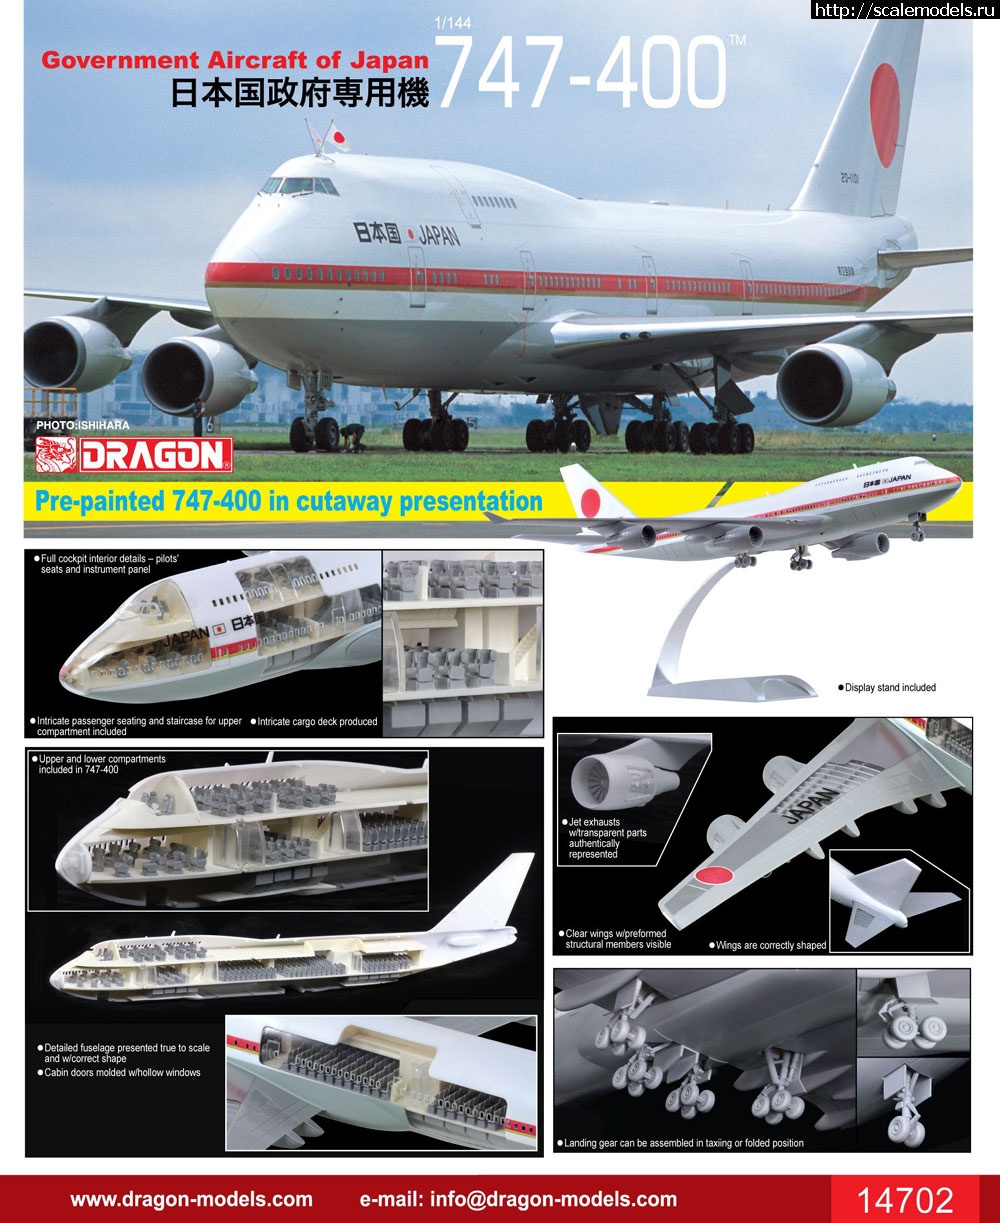 1324554249_14702poster.jpg :  Dragon: 1/144 Boeing 747-400 Government Aircraft of Japan  